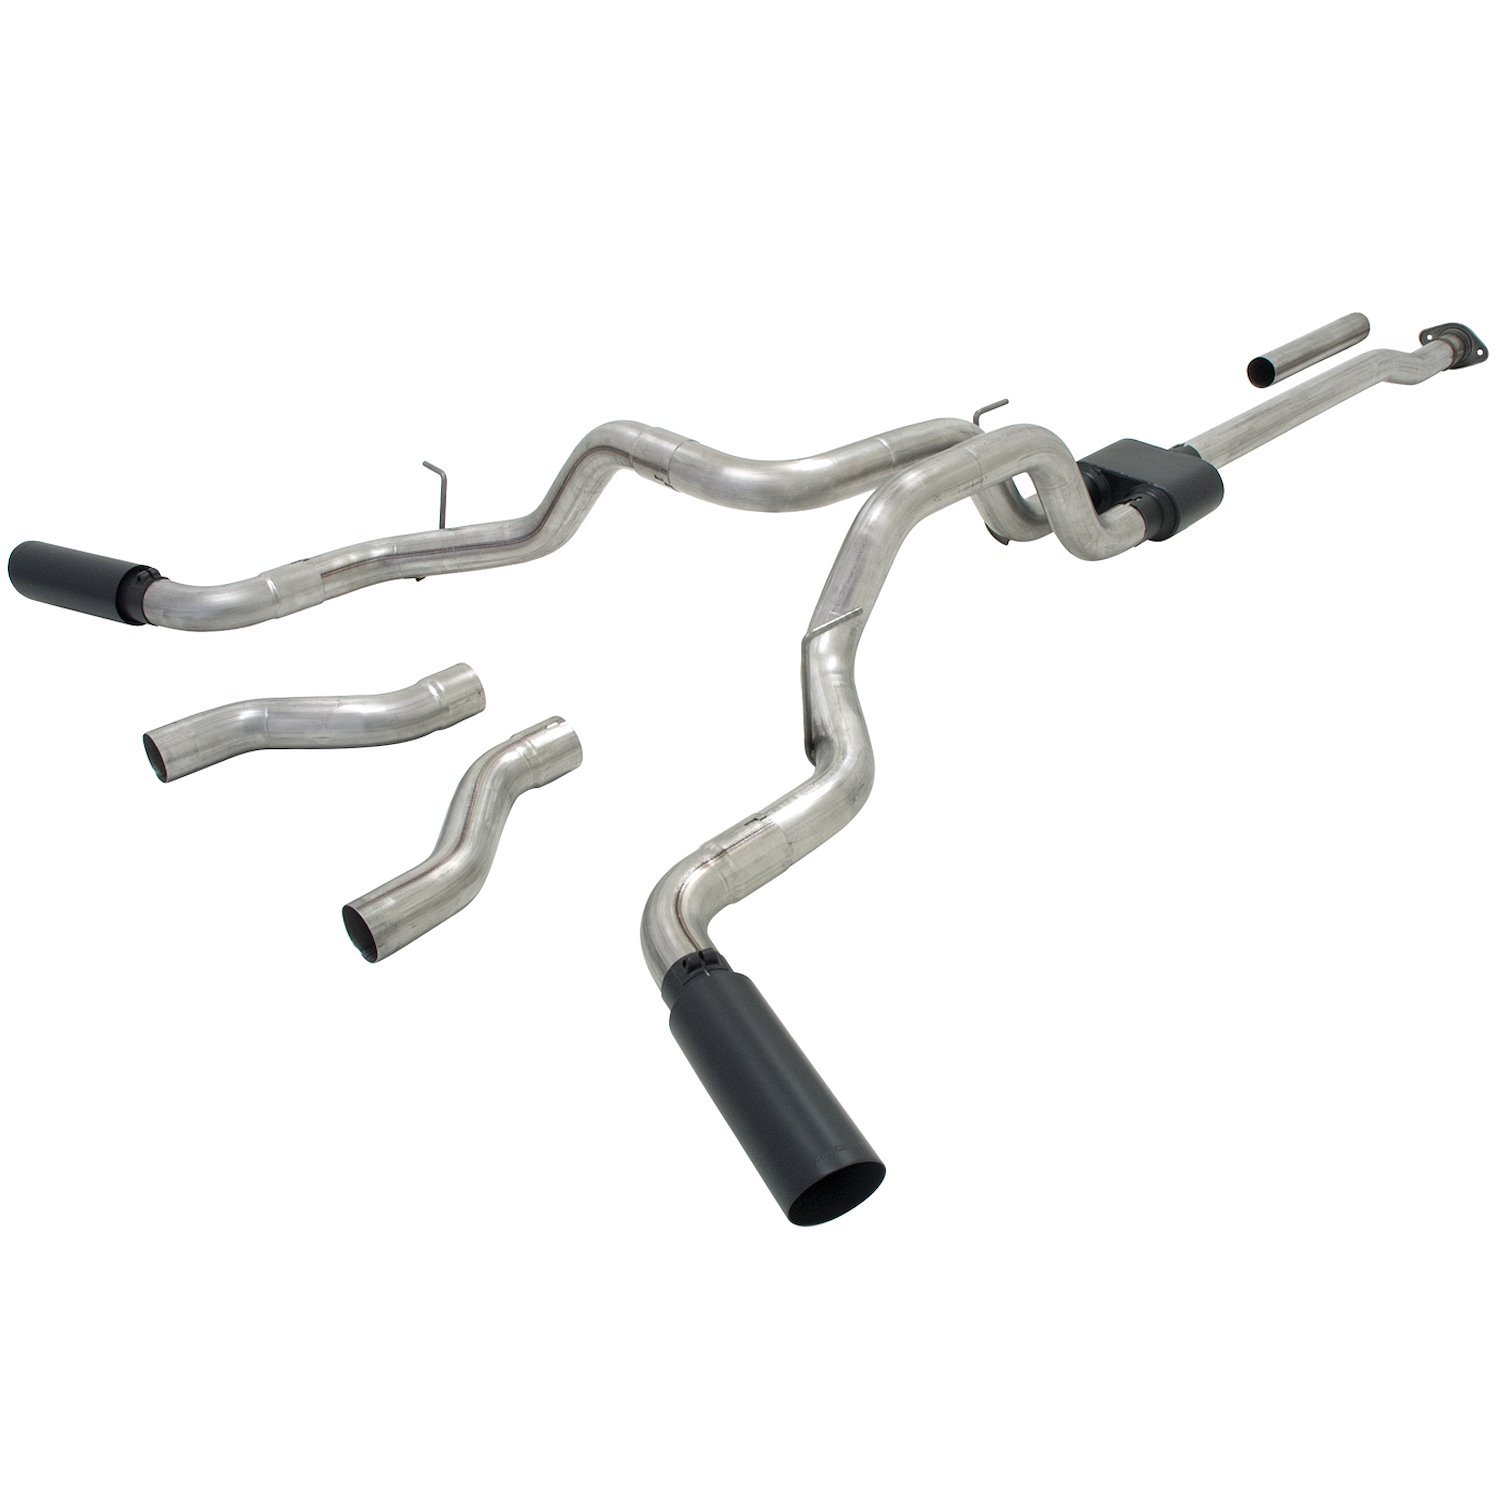 Outlaw Series Cat-Back Exhaust System 2009-2014 Ford F-150 4.6L/5.0L/5.4L V8